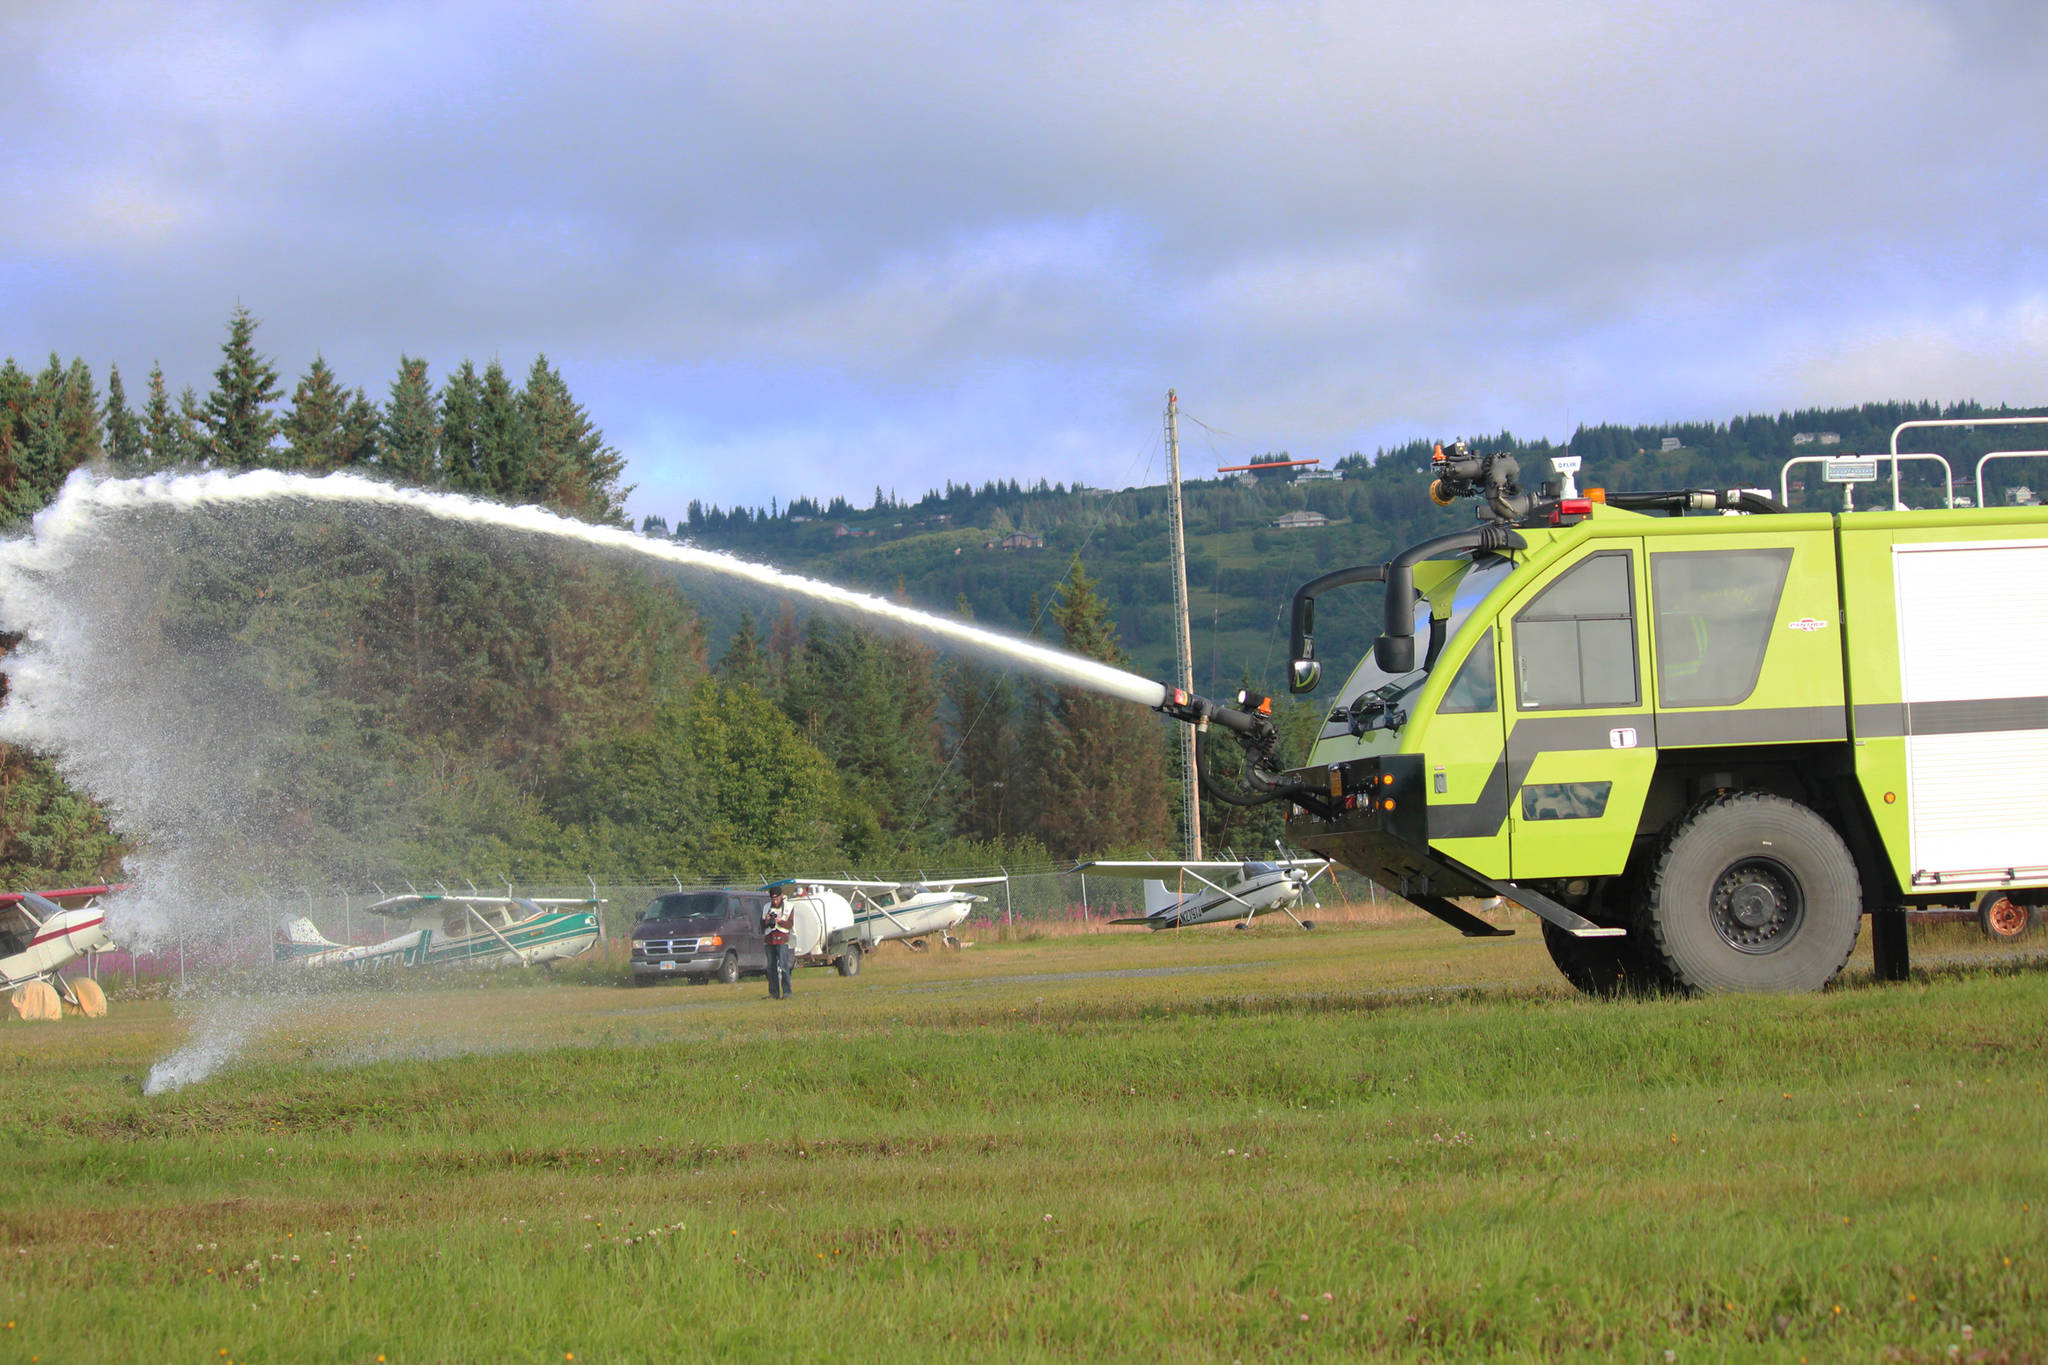 Foam sprays out from a fire engine and onto a bus used as a crash plane and filled with volunteer “victims” during a simulated airplane crash Saturday, Aug. 19, 2017 at the Homer Airport in Homer, Alaska. The emergency drill happens every three years and is required for the airport to stay in Federal Aviation Administration compliance. It tests the ability of airport personnel and members of area emergency response agencies to handle various disaster scenarios at the airport, like a crash. (Photo by Megan Pacer/Homer News)